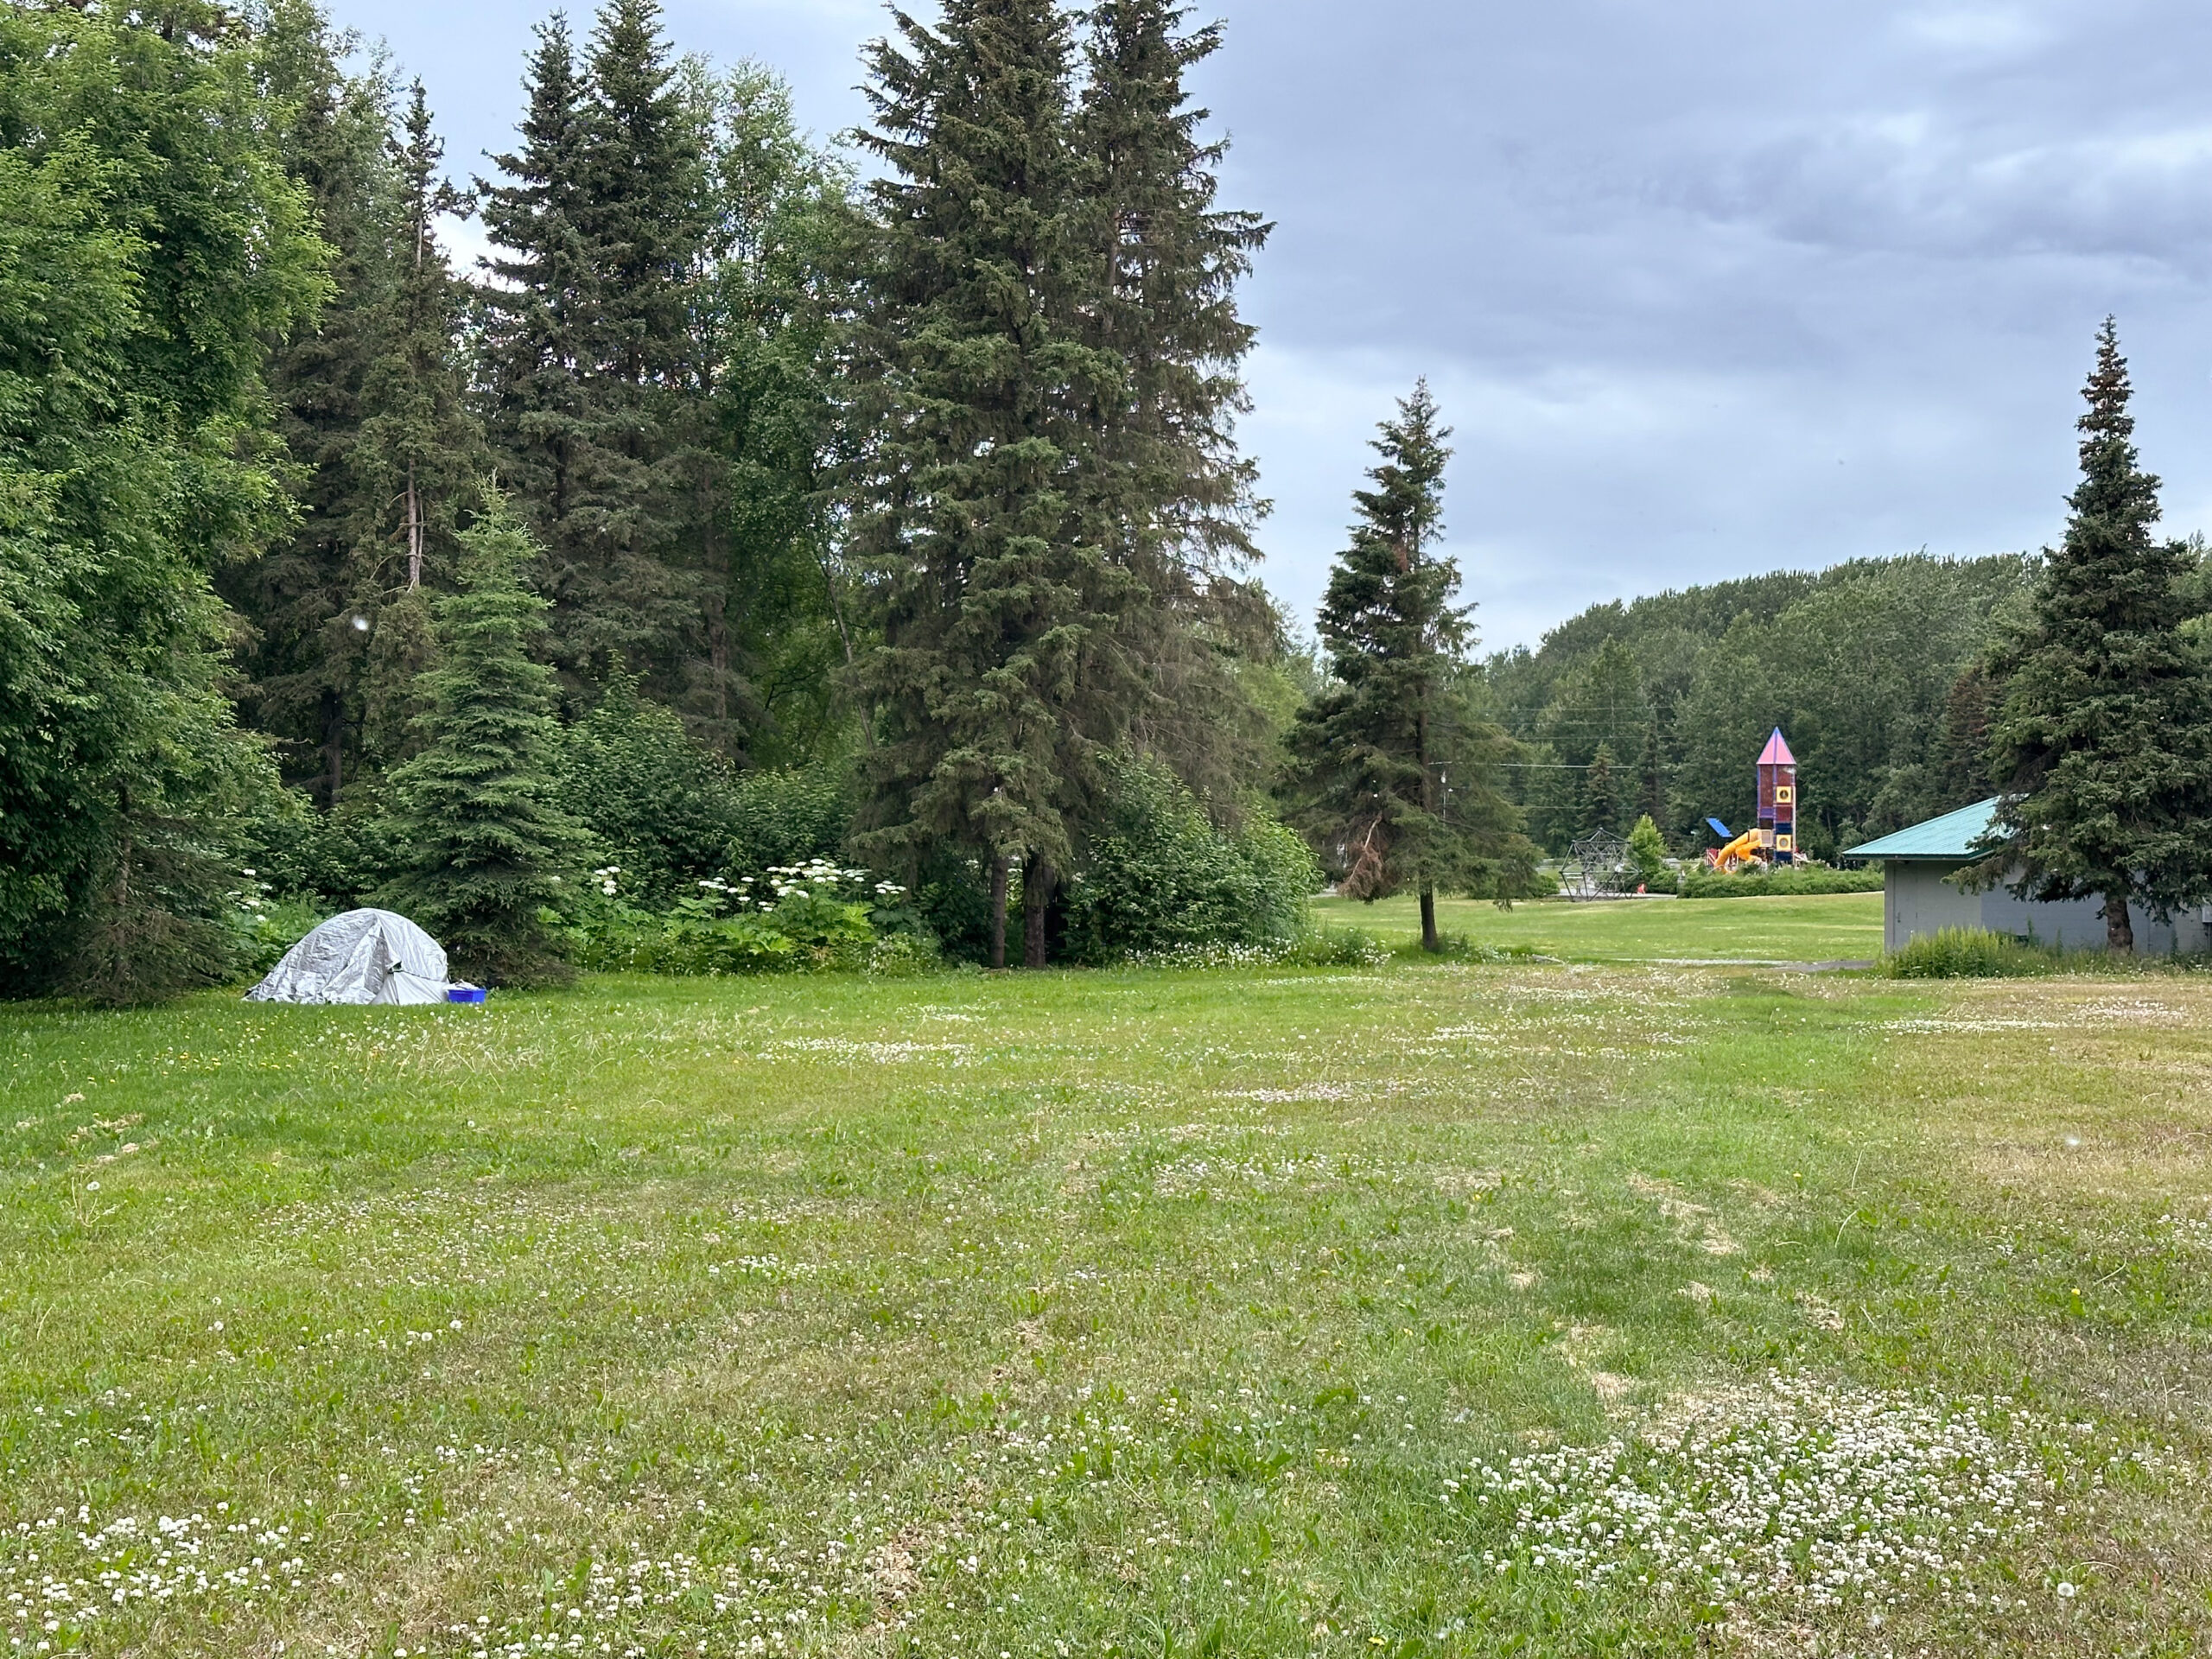 A tent with a gray tarp over over it set up with a kids playground in the distance.